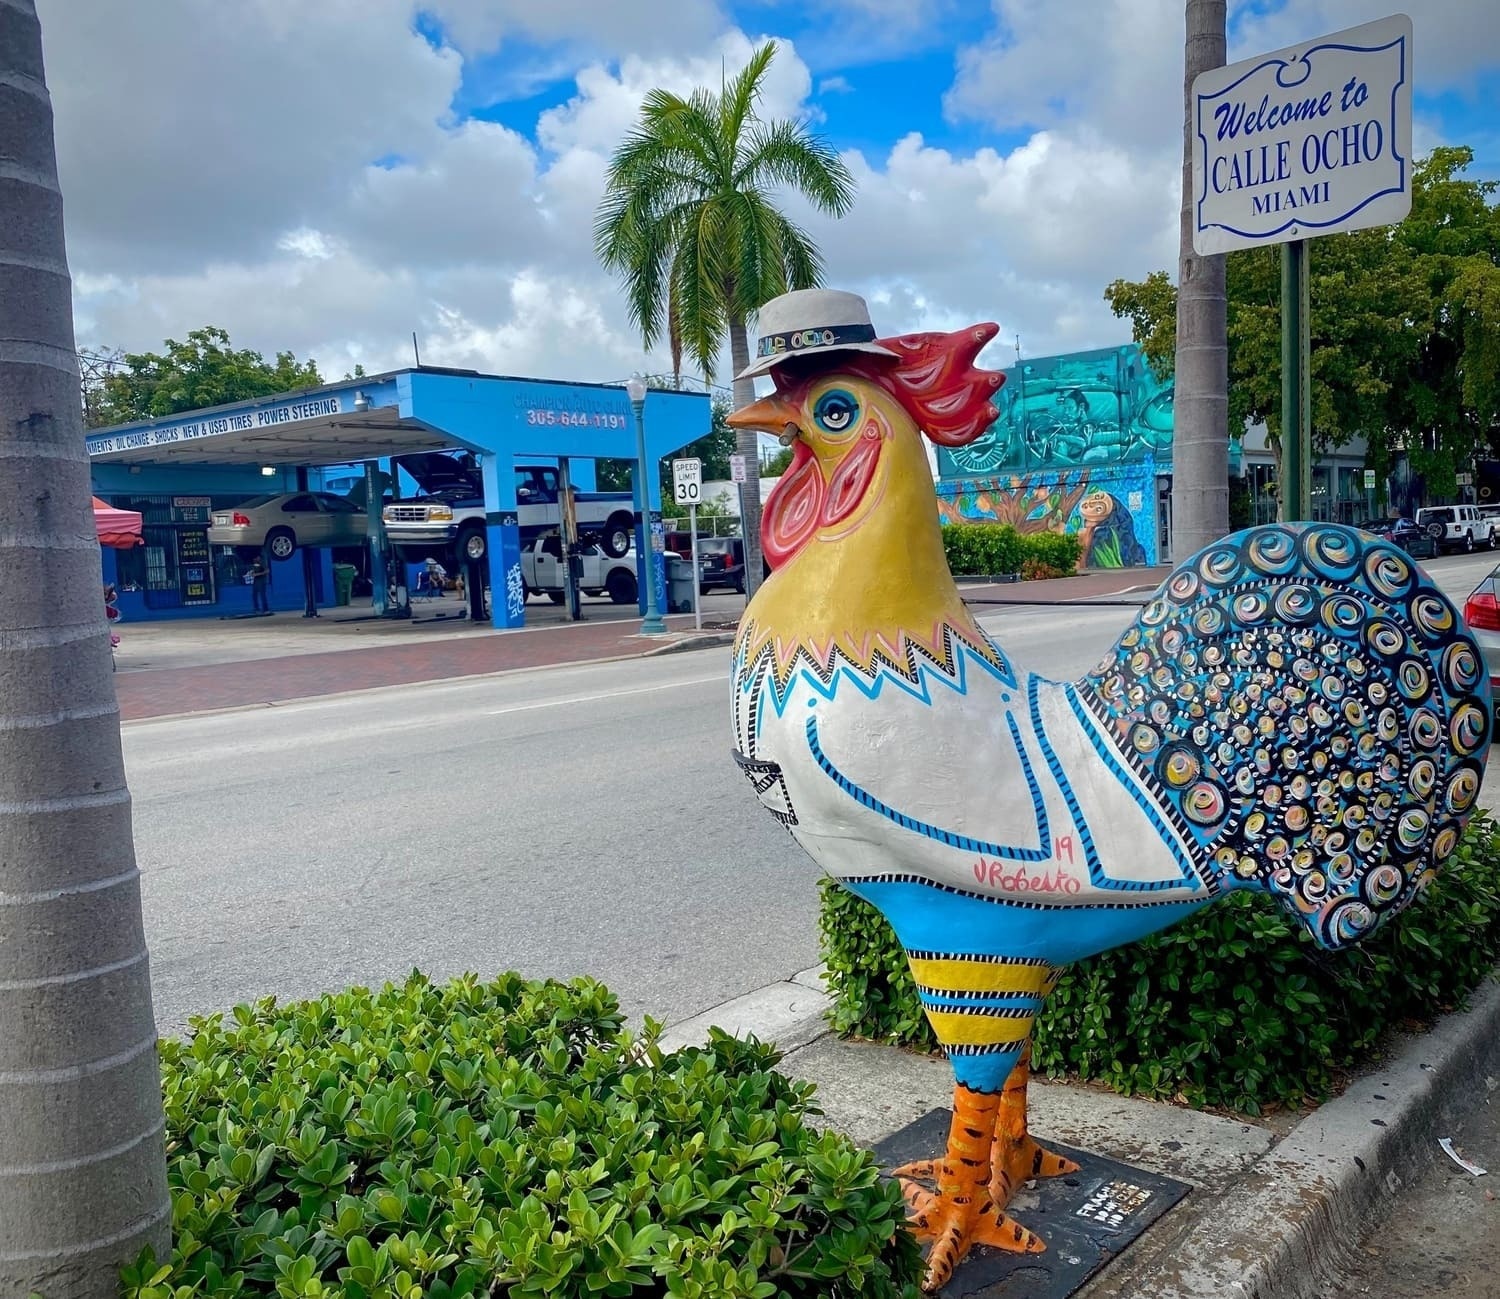 a statue of a colorful rooster in front of a welcome to calle ocho miami sign